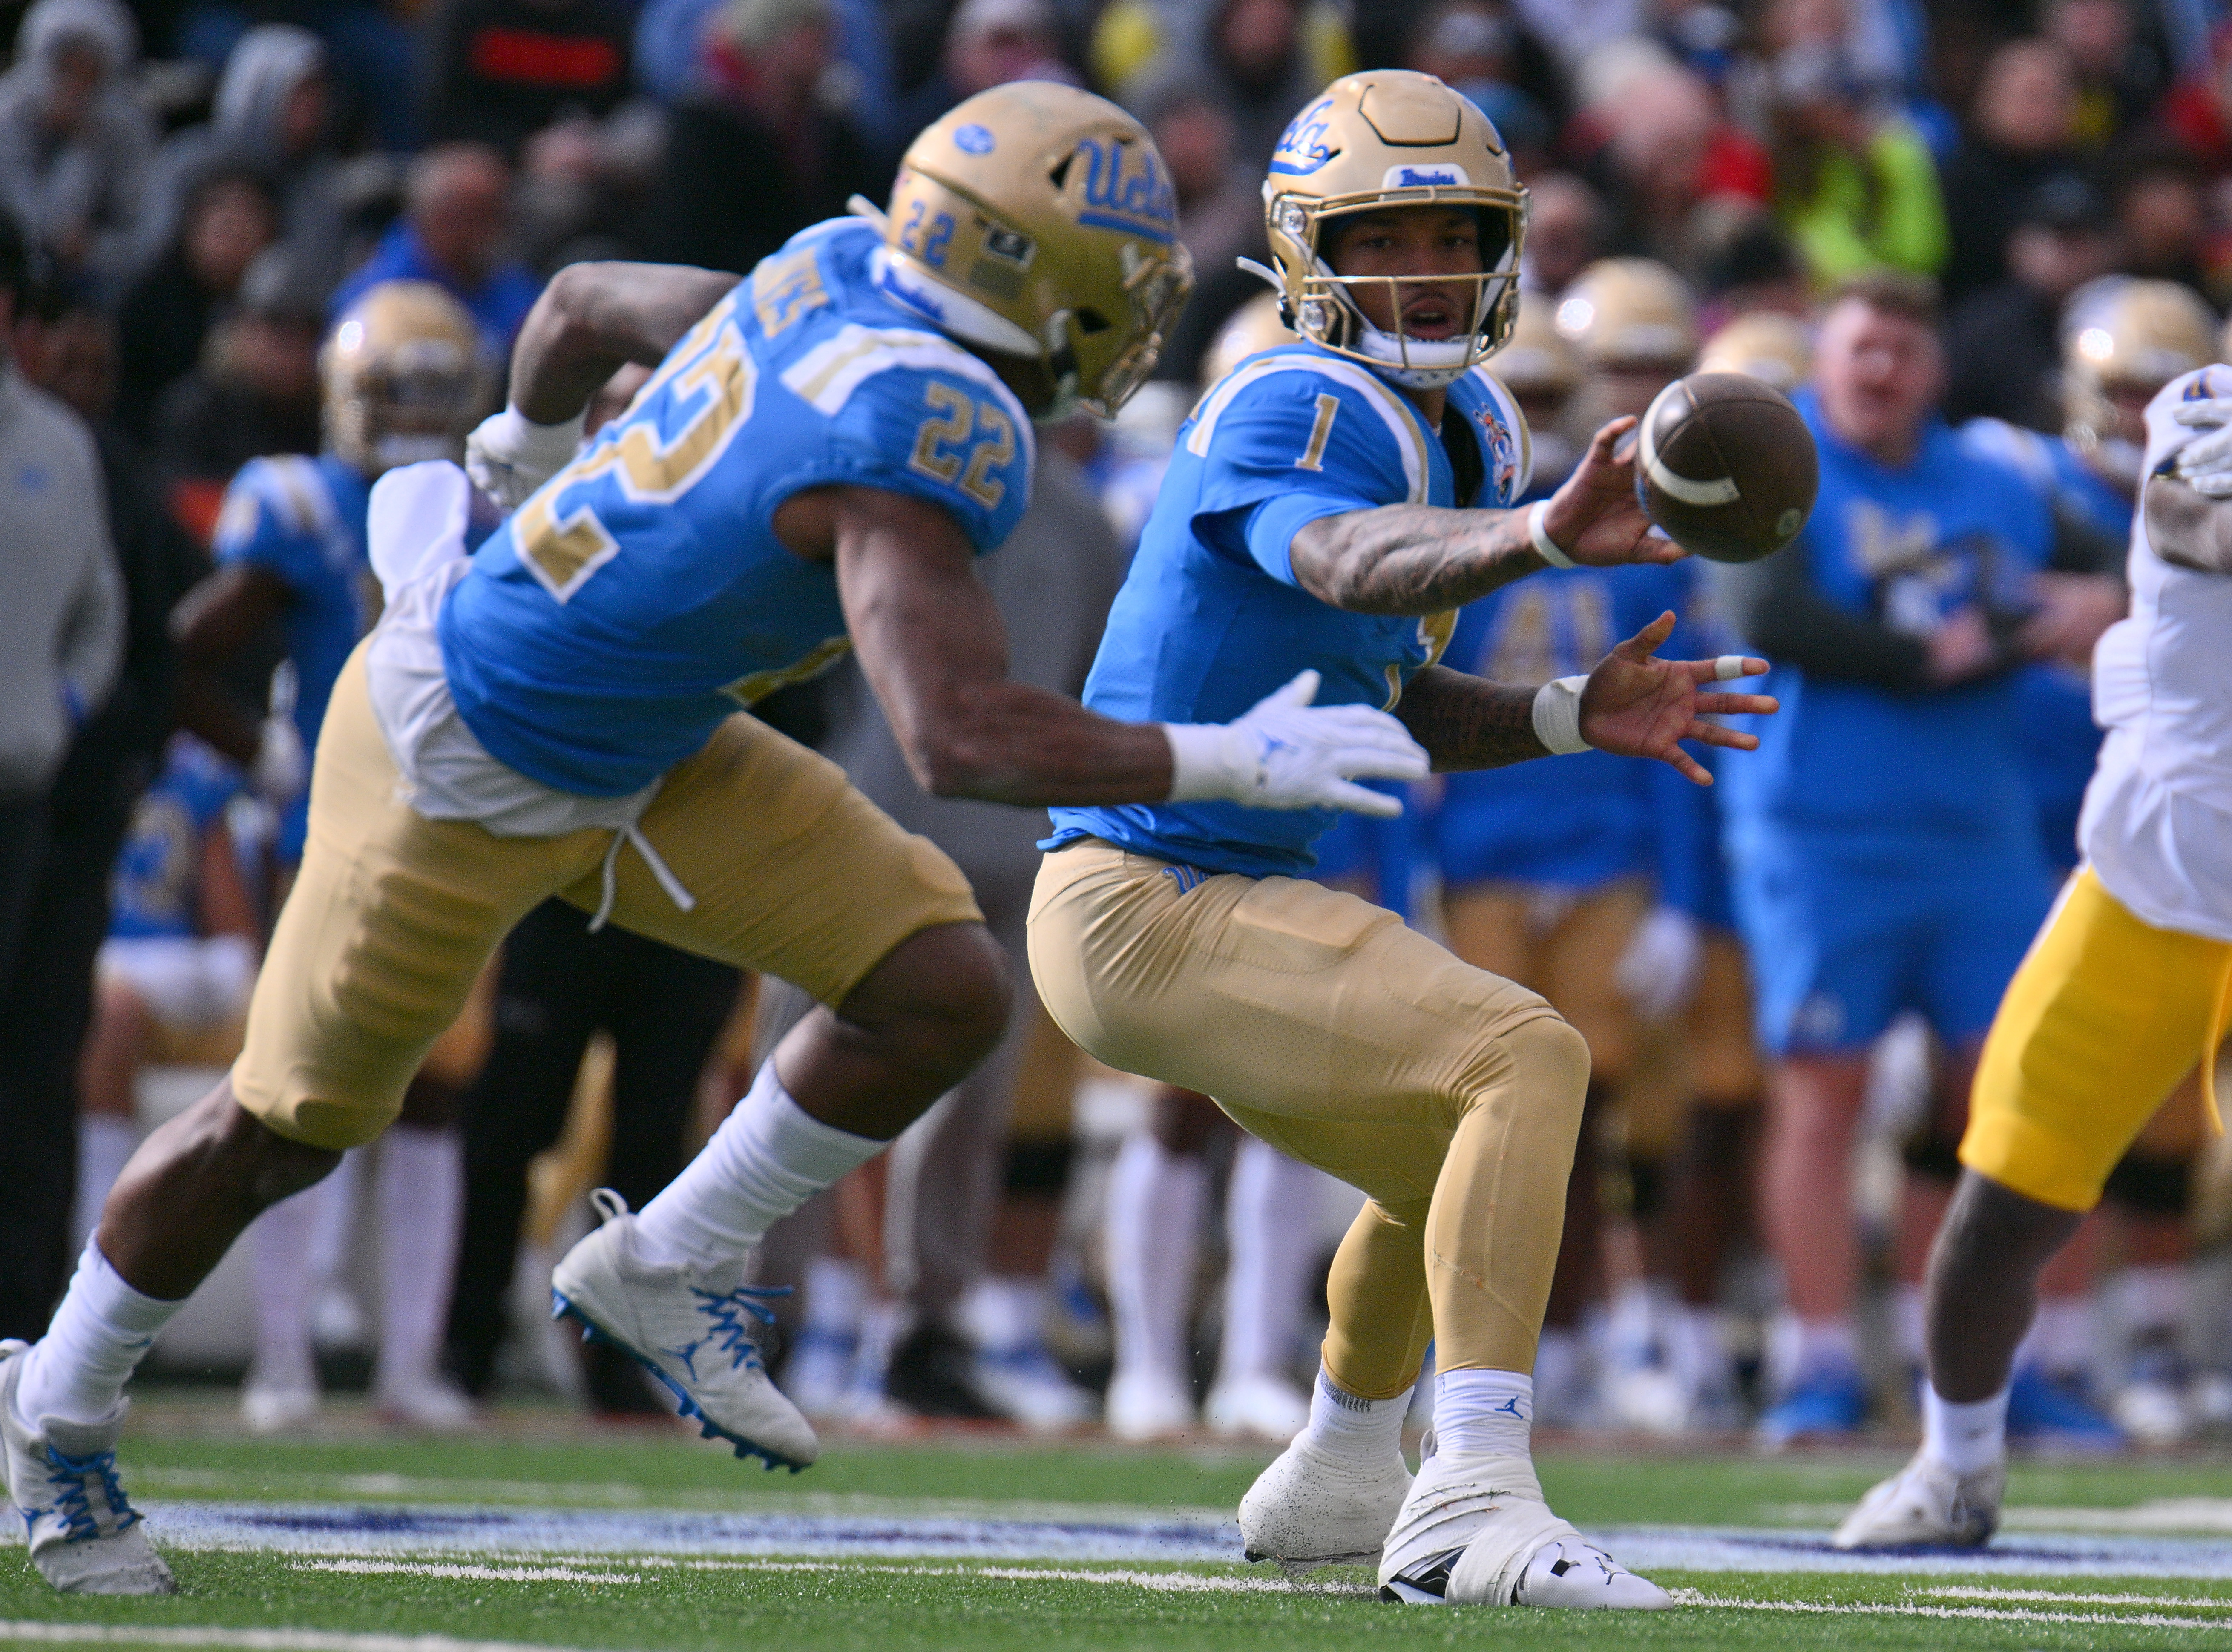 Quarterback Dorian Thompson-Robinson #1 of the UCLA Bruins pitches the ball to running back Keegan Jones #22 during the second half of the Tony the Tiger Sun Bowl game between the Pittsburgh Panthers and the Bruins at Sun Bowl Stadium on December 30, 2022 in El Paso, Texas. The Panthers defeated the Bruins 37-35.